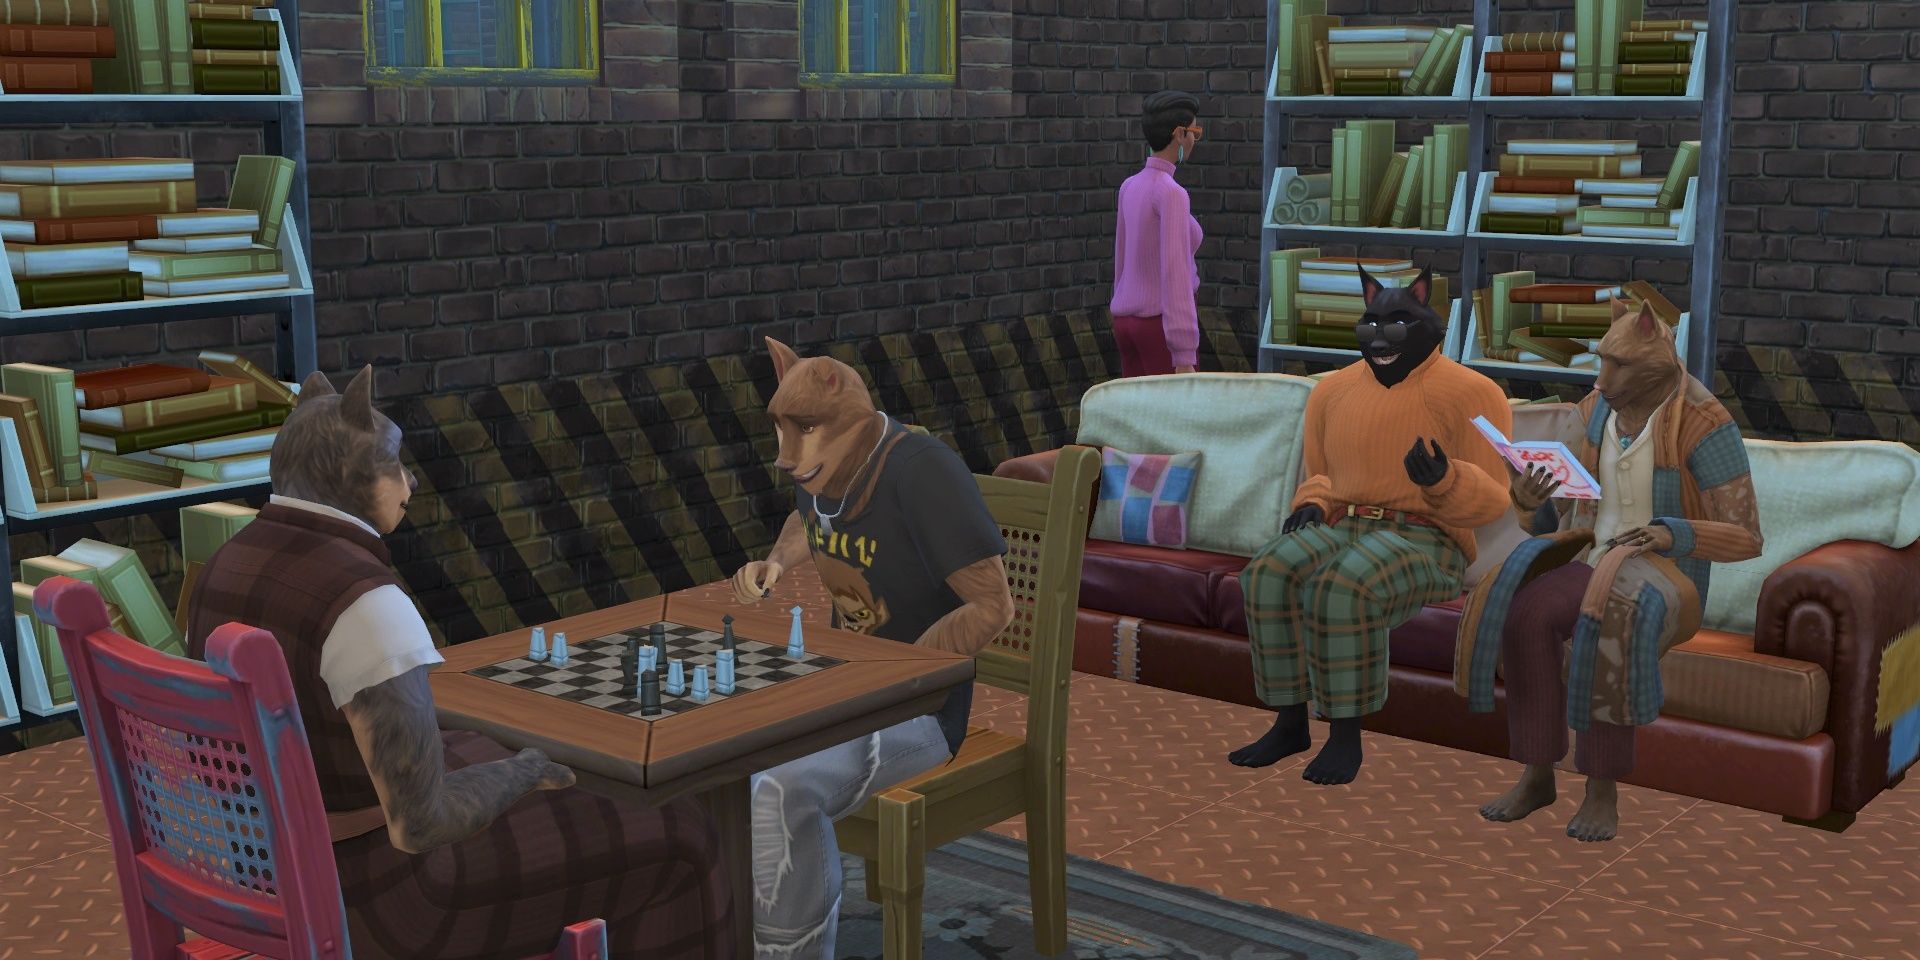 At the Moonwood Mill Library, two werewolves play chess, while to read on a worn patchwork couch.